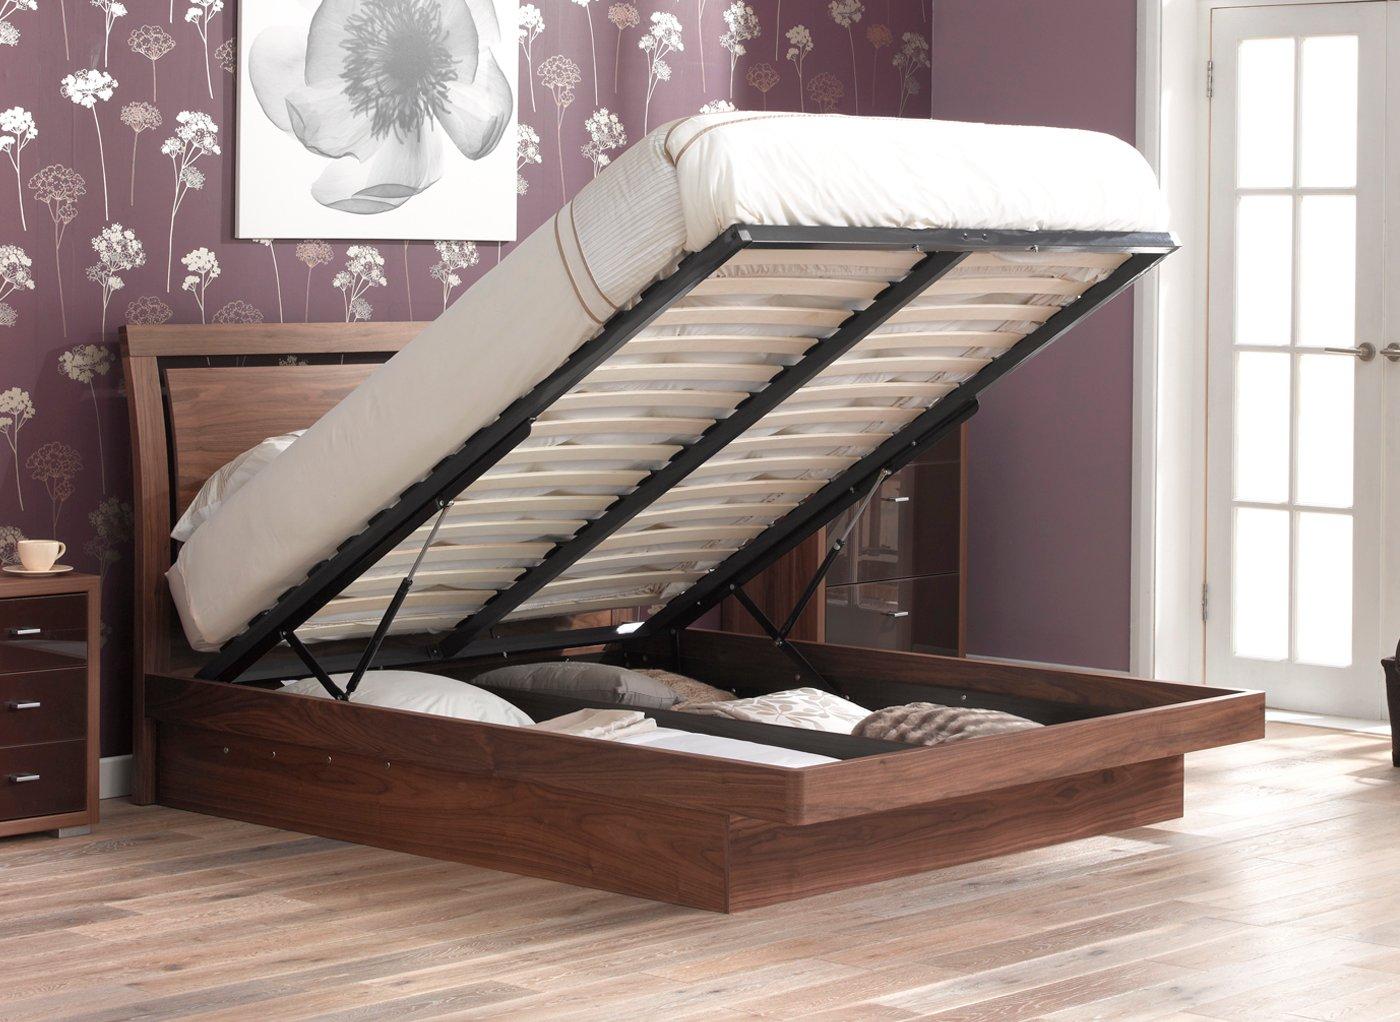 king size ottoman bed with memory foam mattress